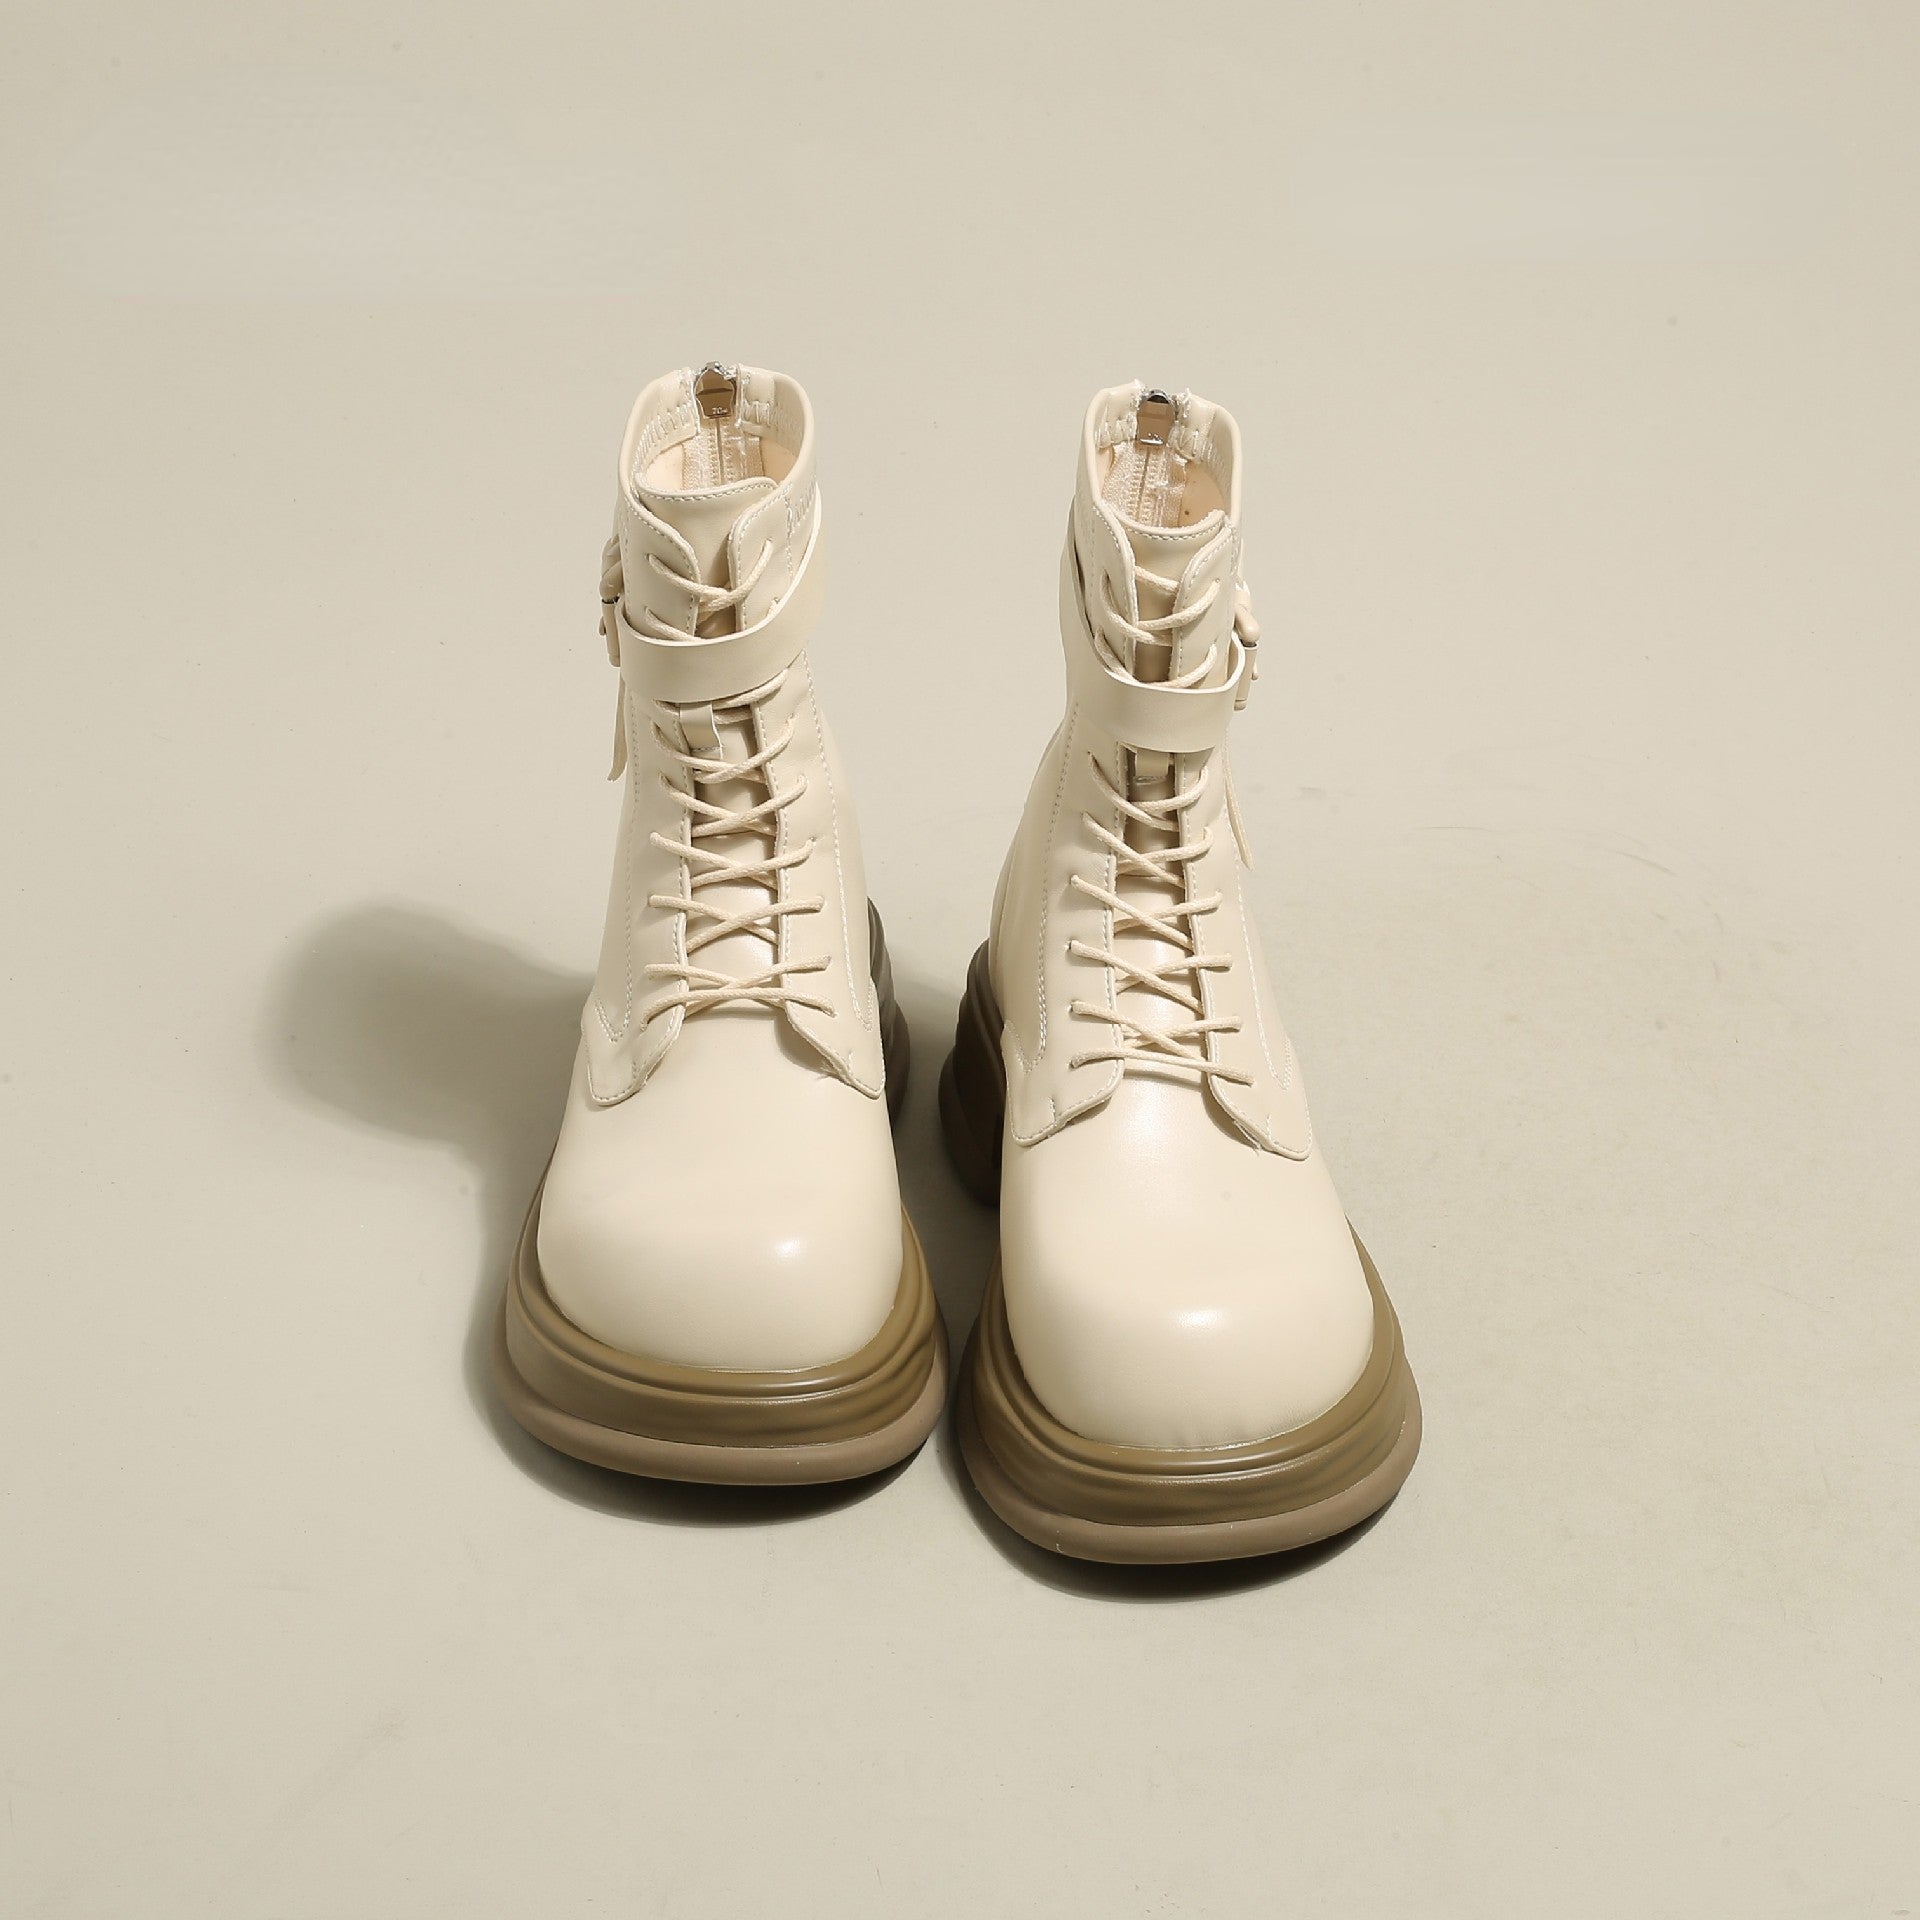 Dr. Martens Boots ladies new fashion cool boots